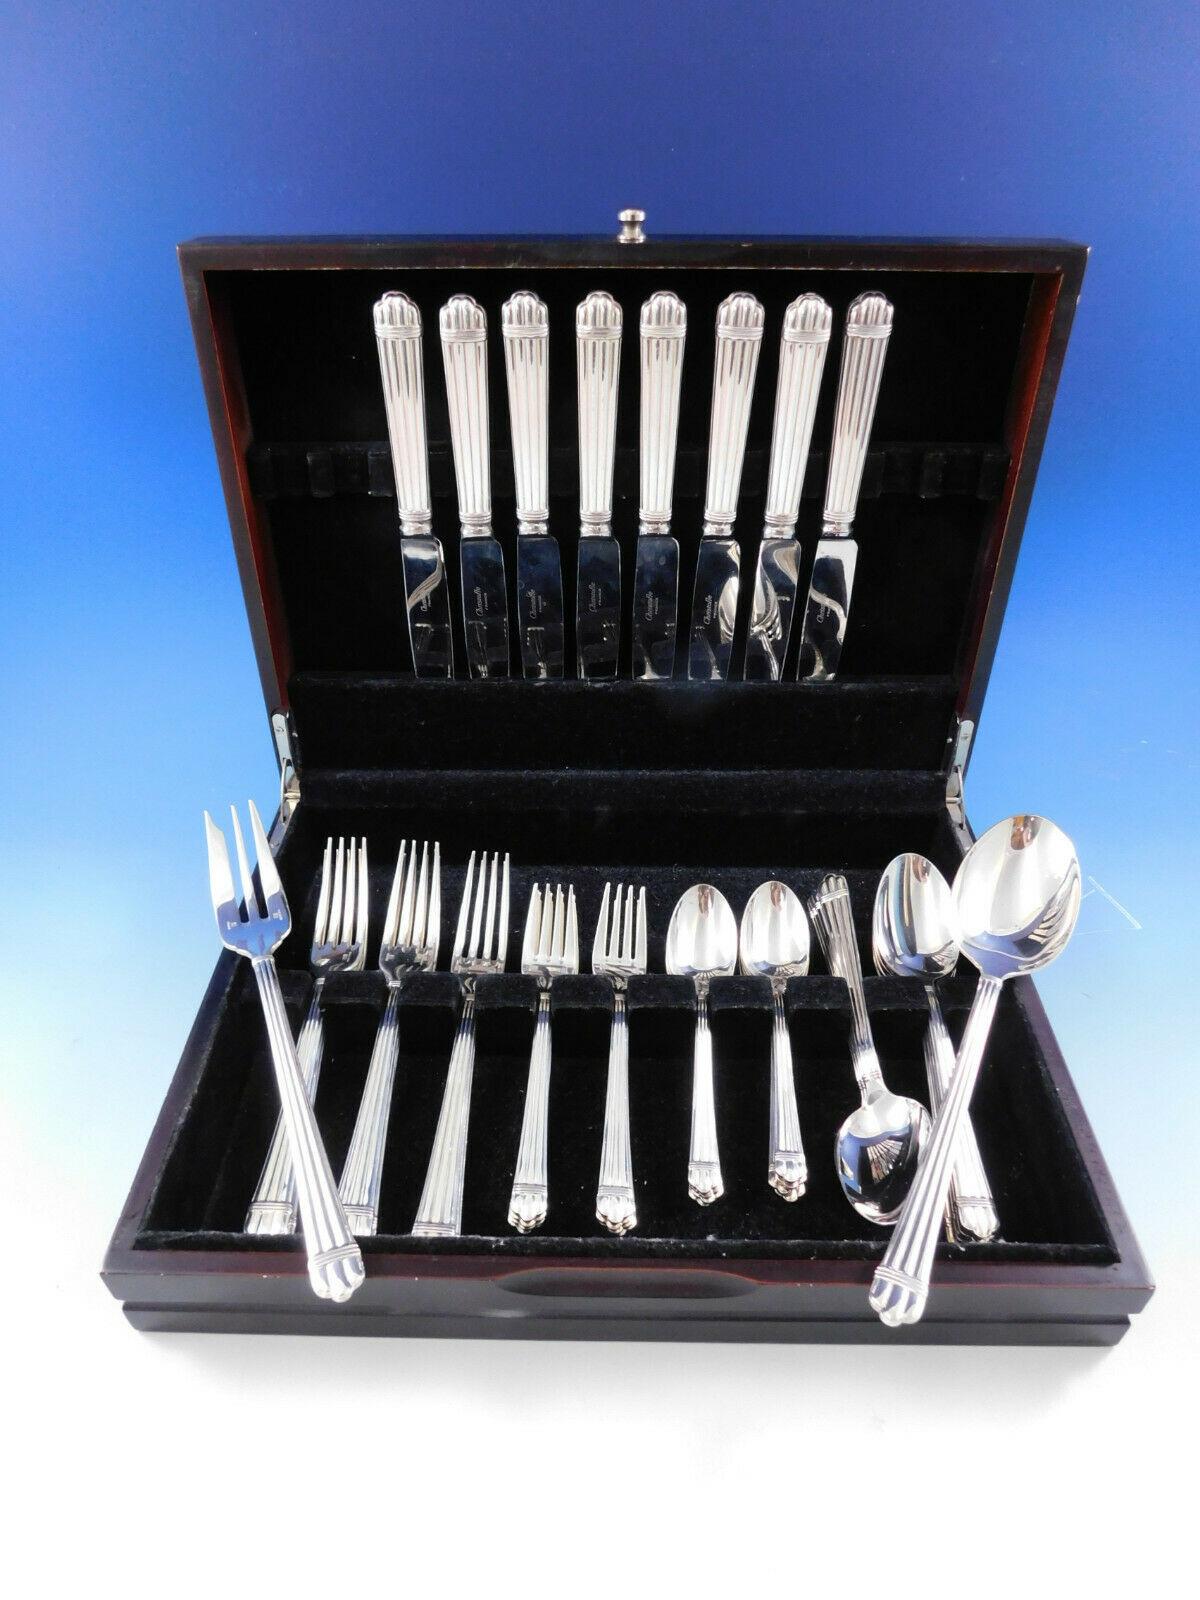 Dinner size Aria by Christofle France estate silver plate flatware set  42 pieces. This set includes:

8 dinner size knives, 9 3/4